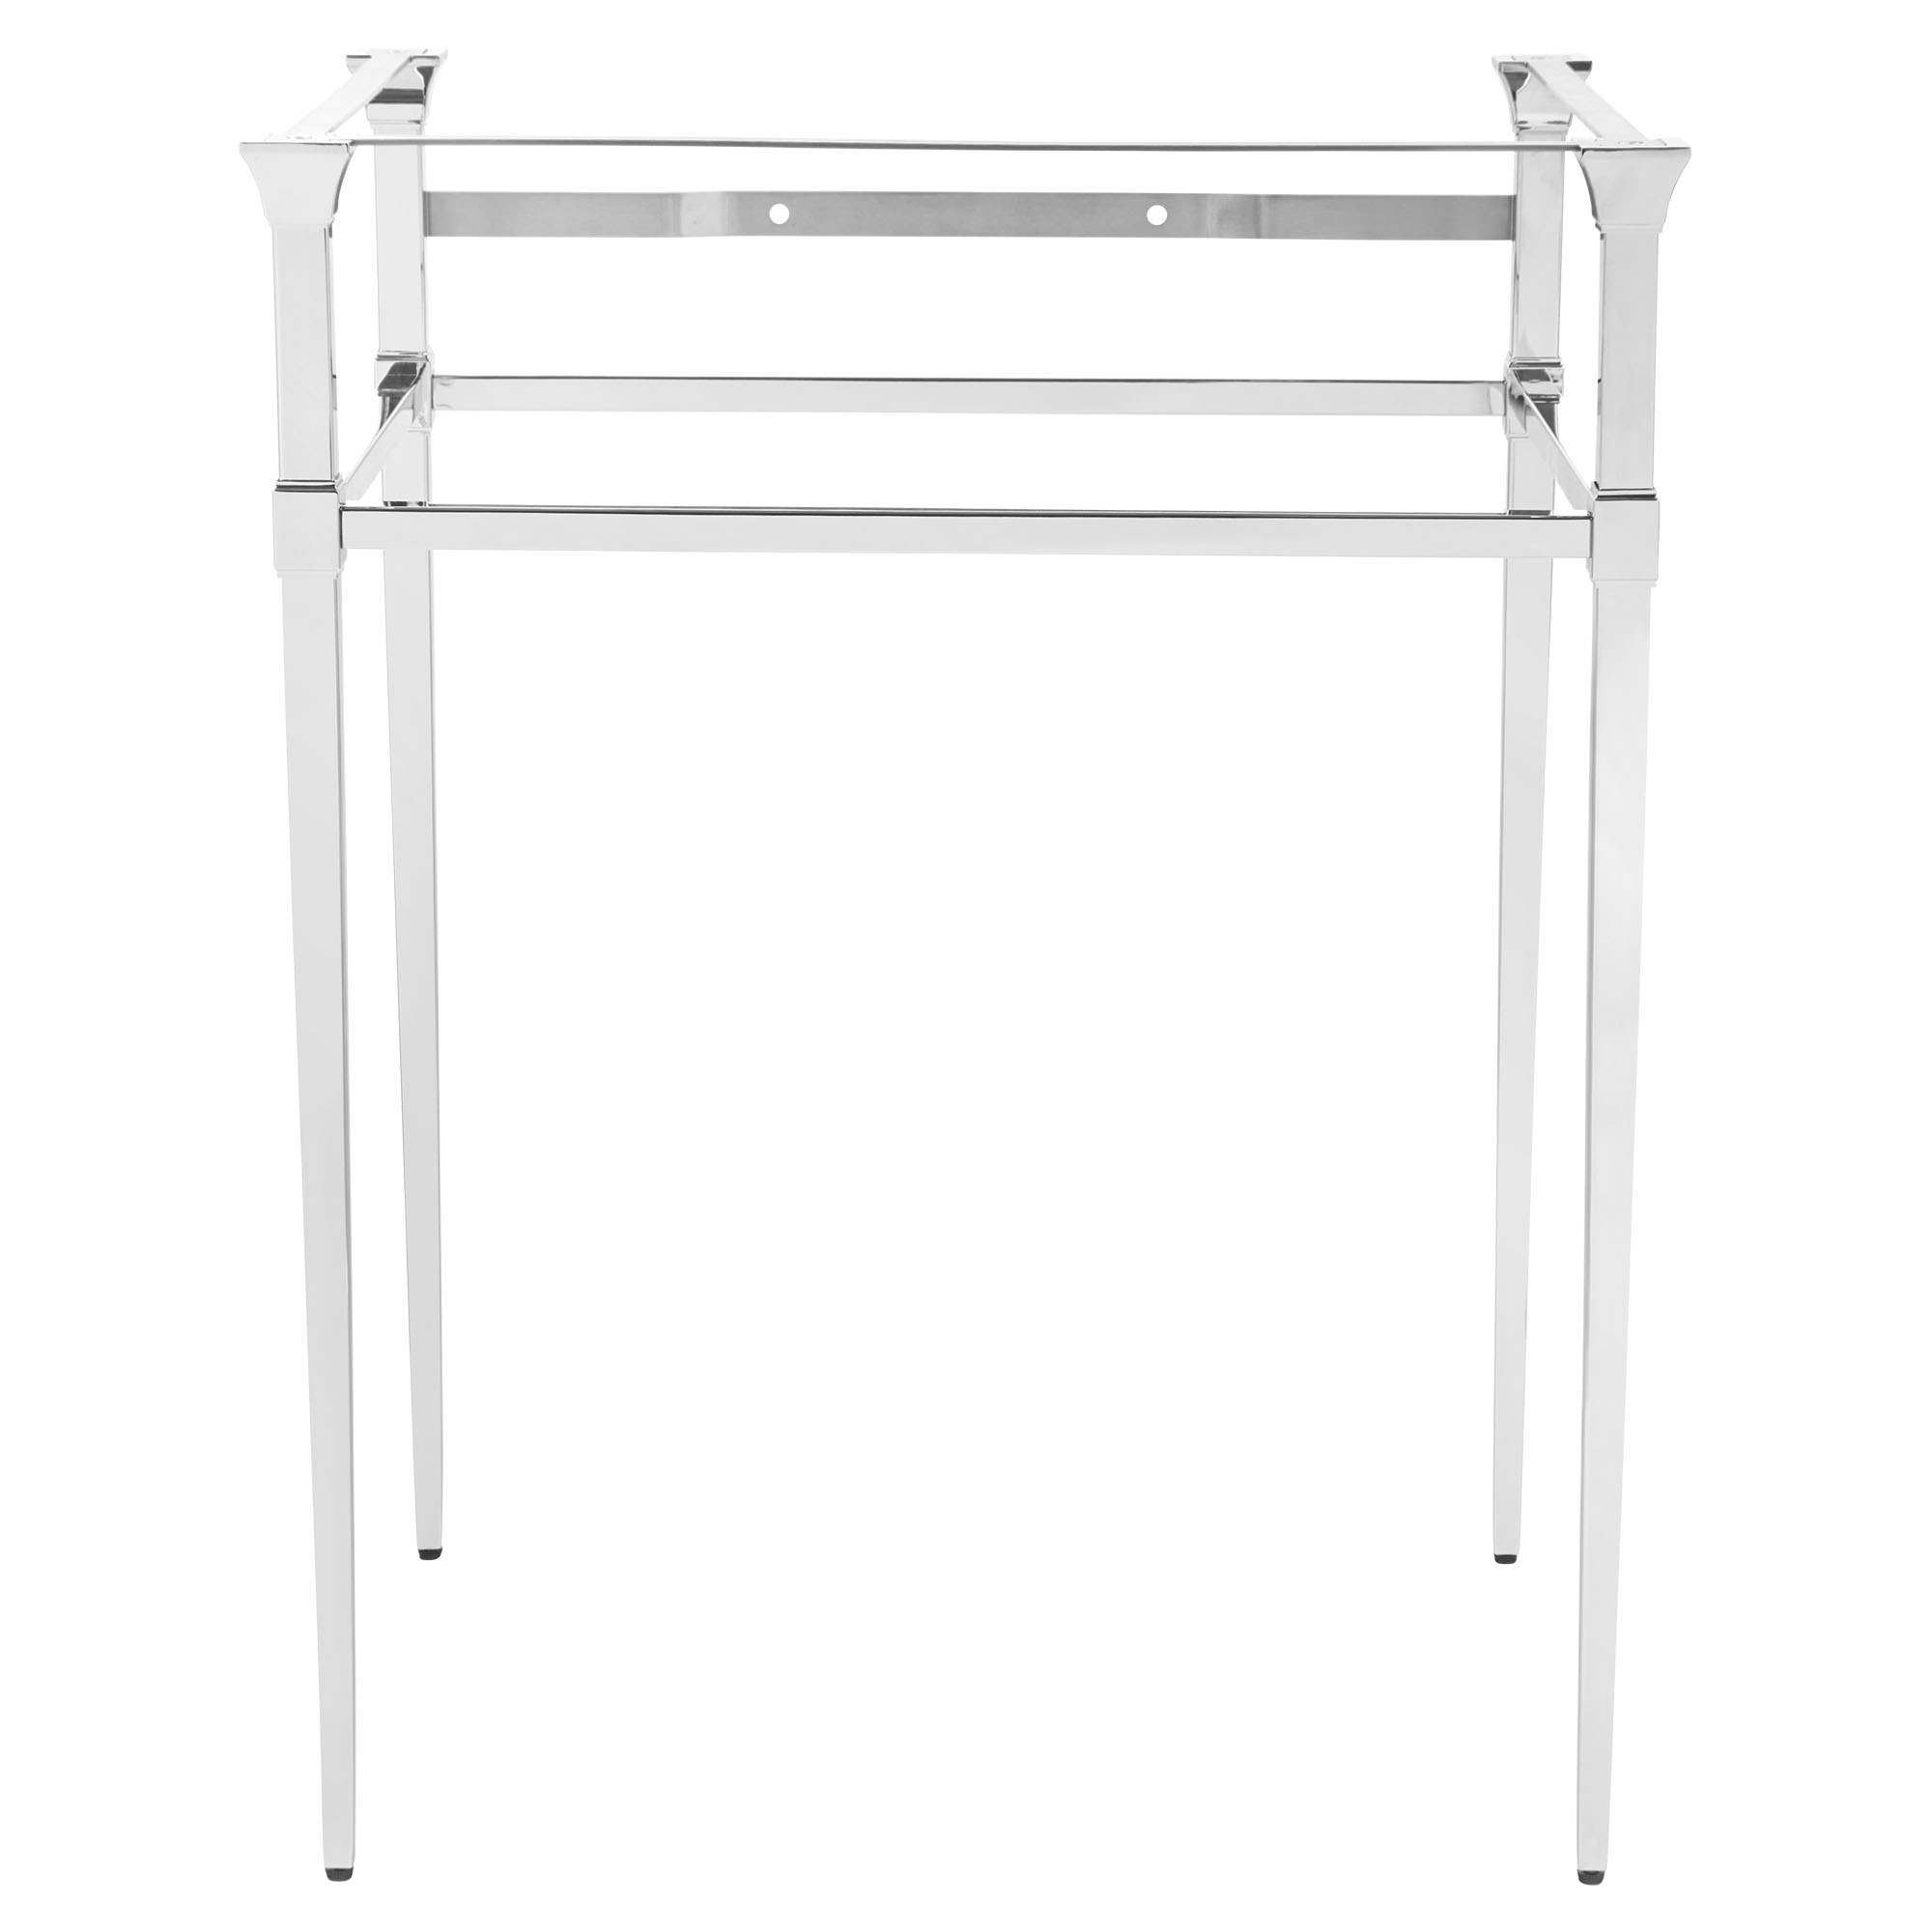 Town Square™ S Console Table